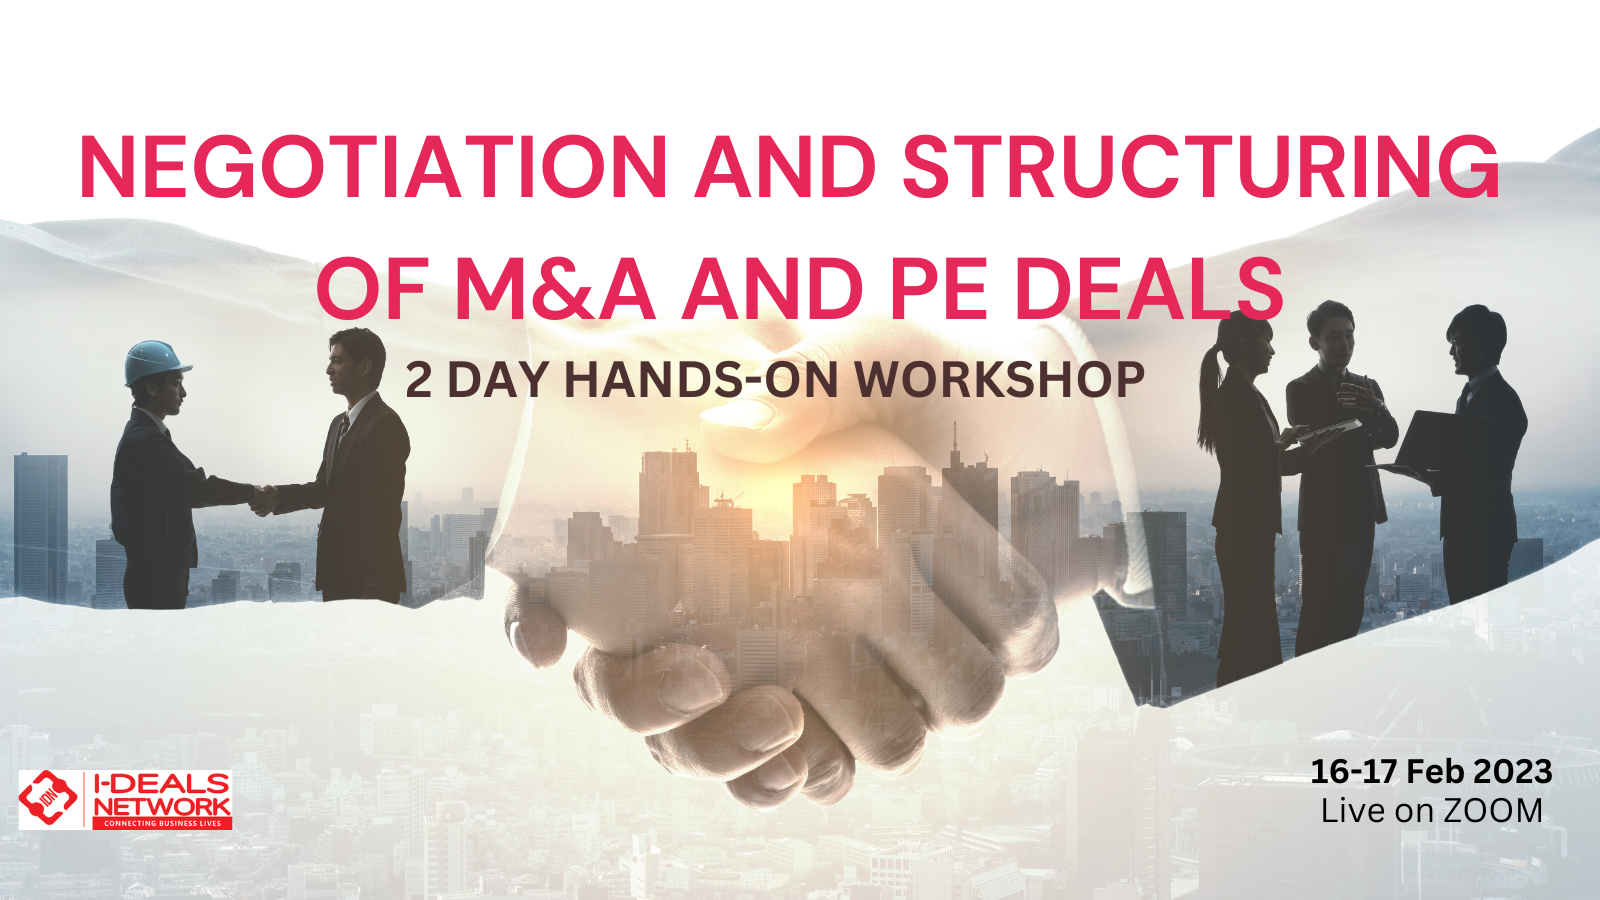 Structuring Negotiation of M&A and PE Deals 2023